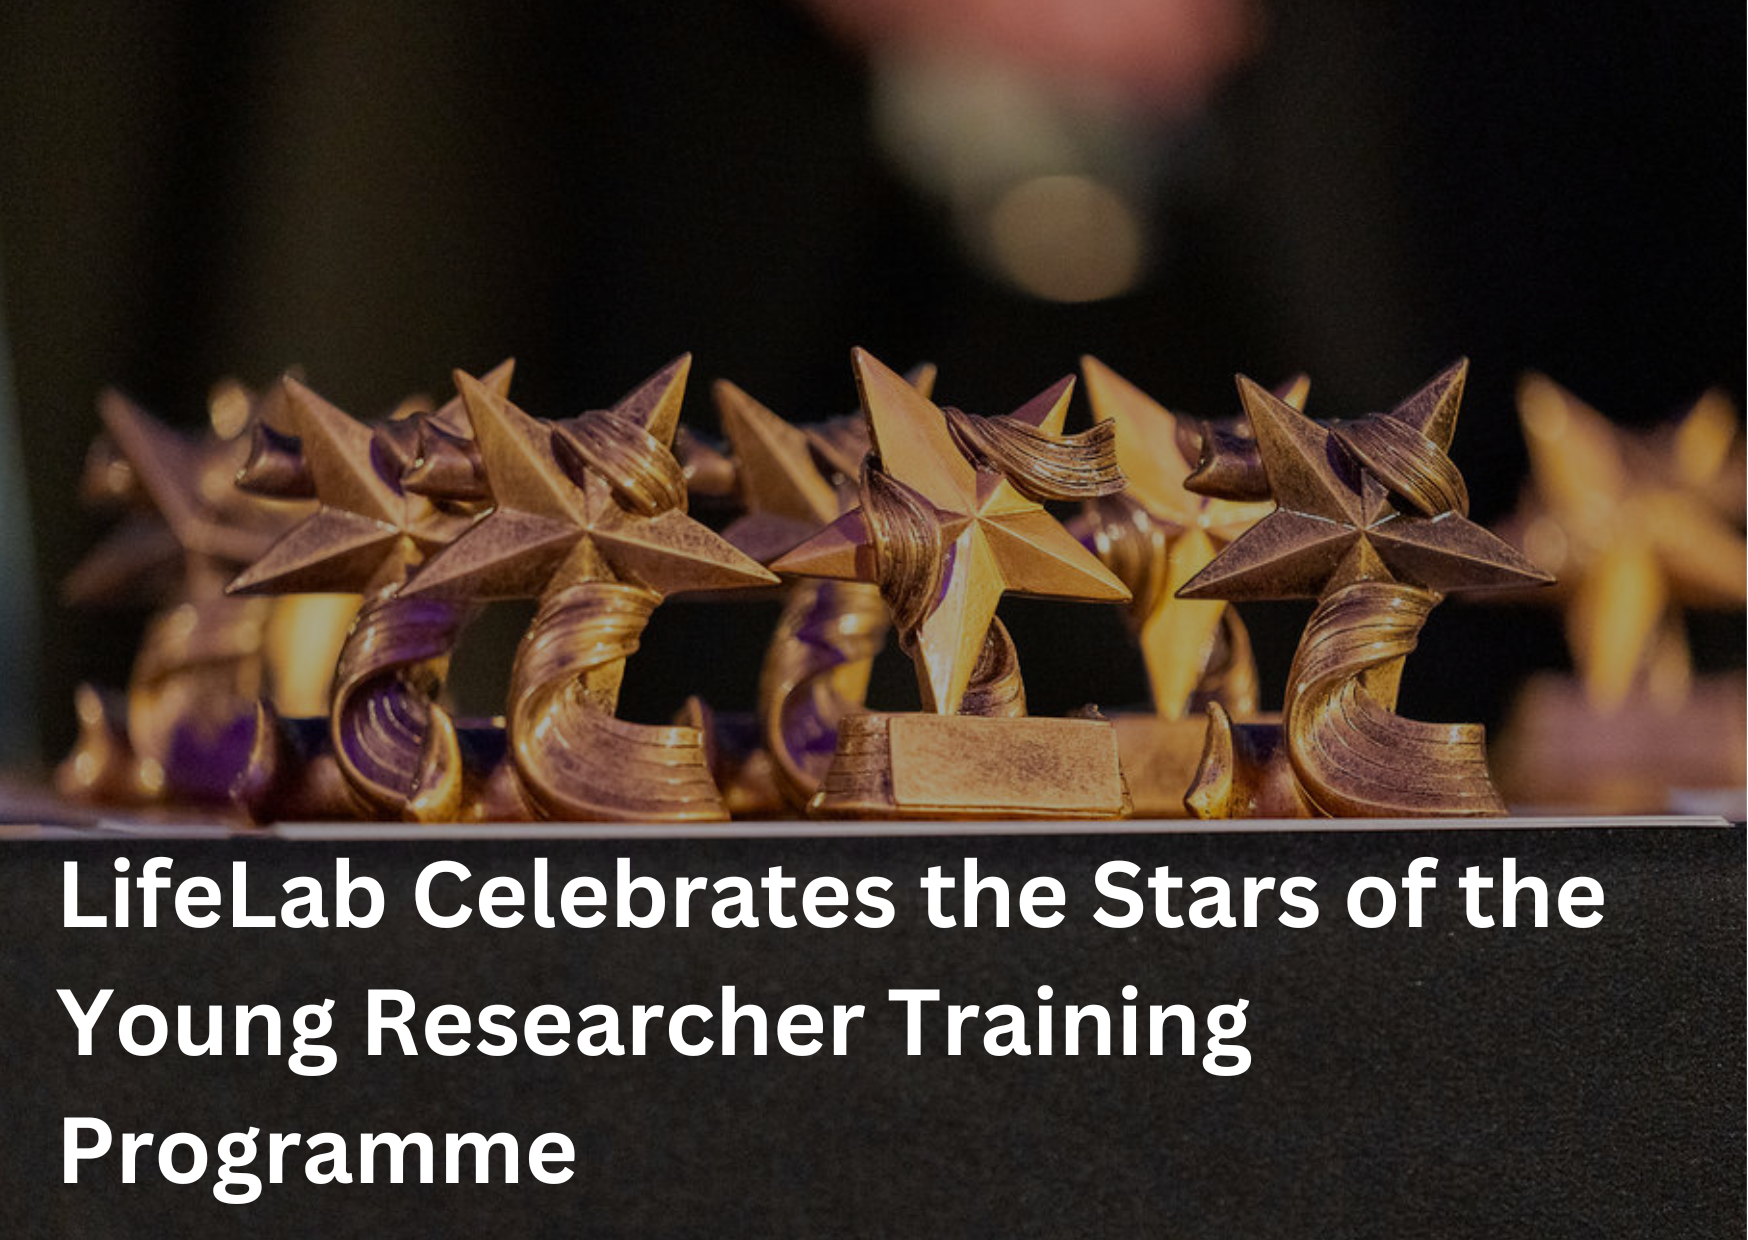 LifeLab celebrates the stars of the young researcher training programme